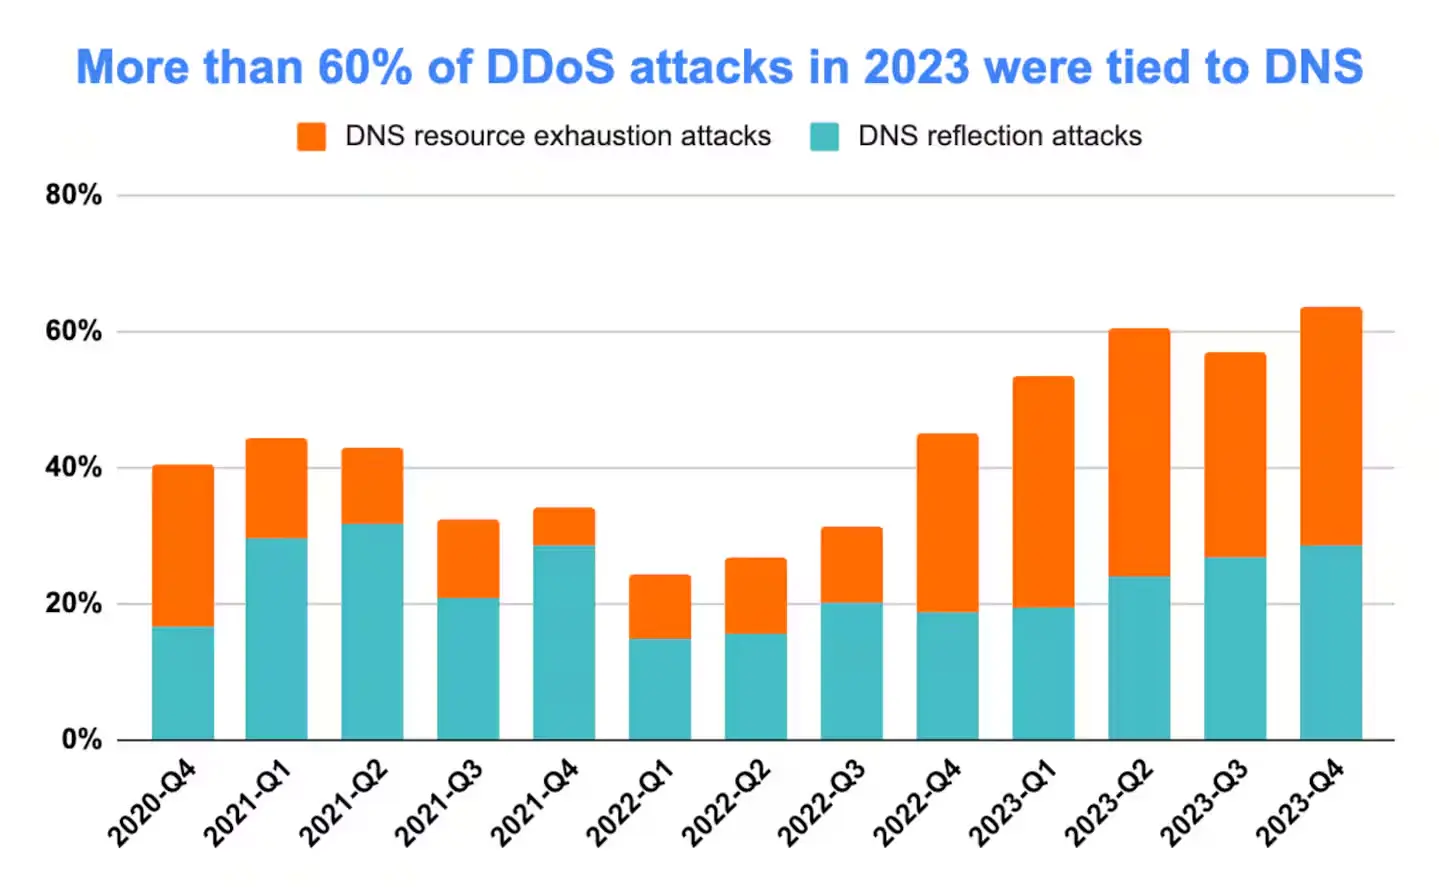 ddos-attacks-in-the-fourth-quarter-of-2023